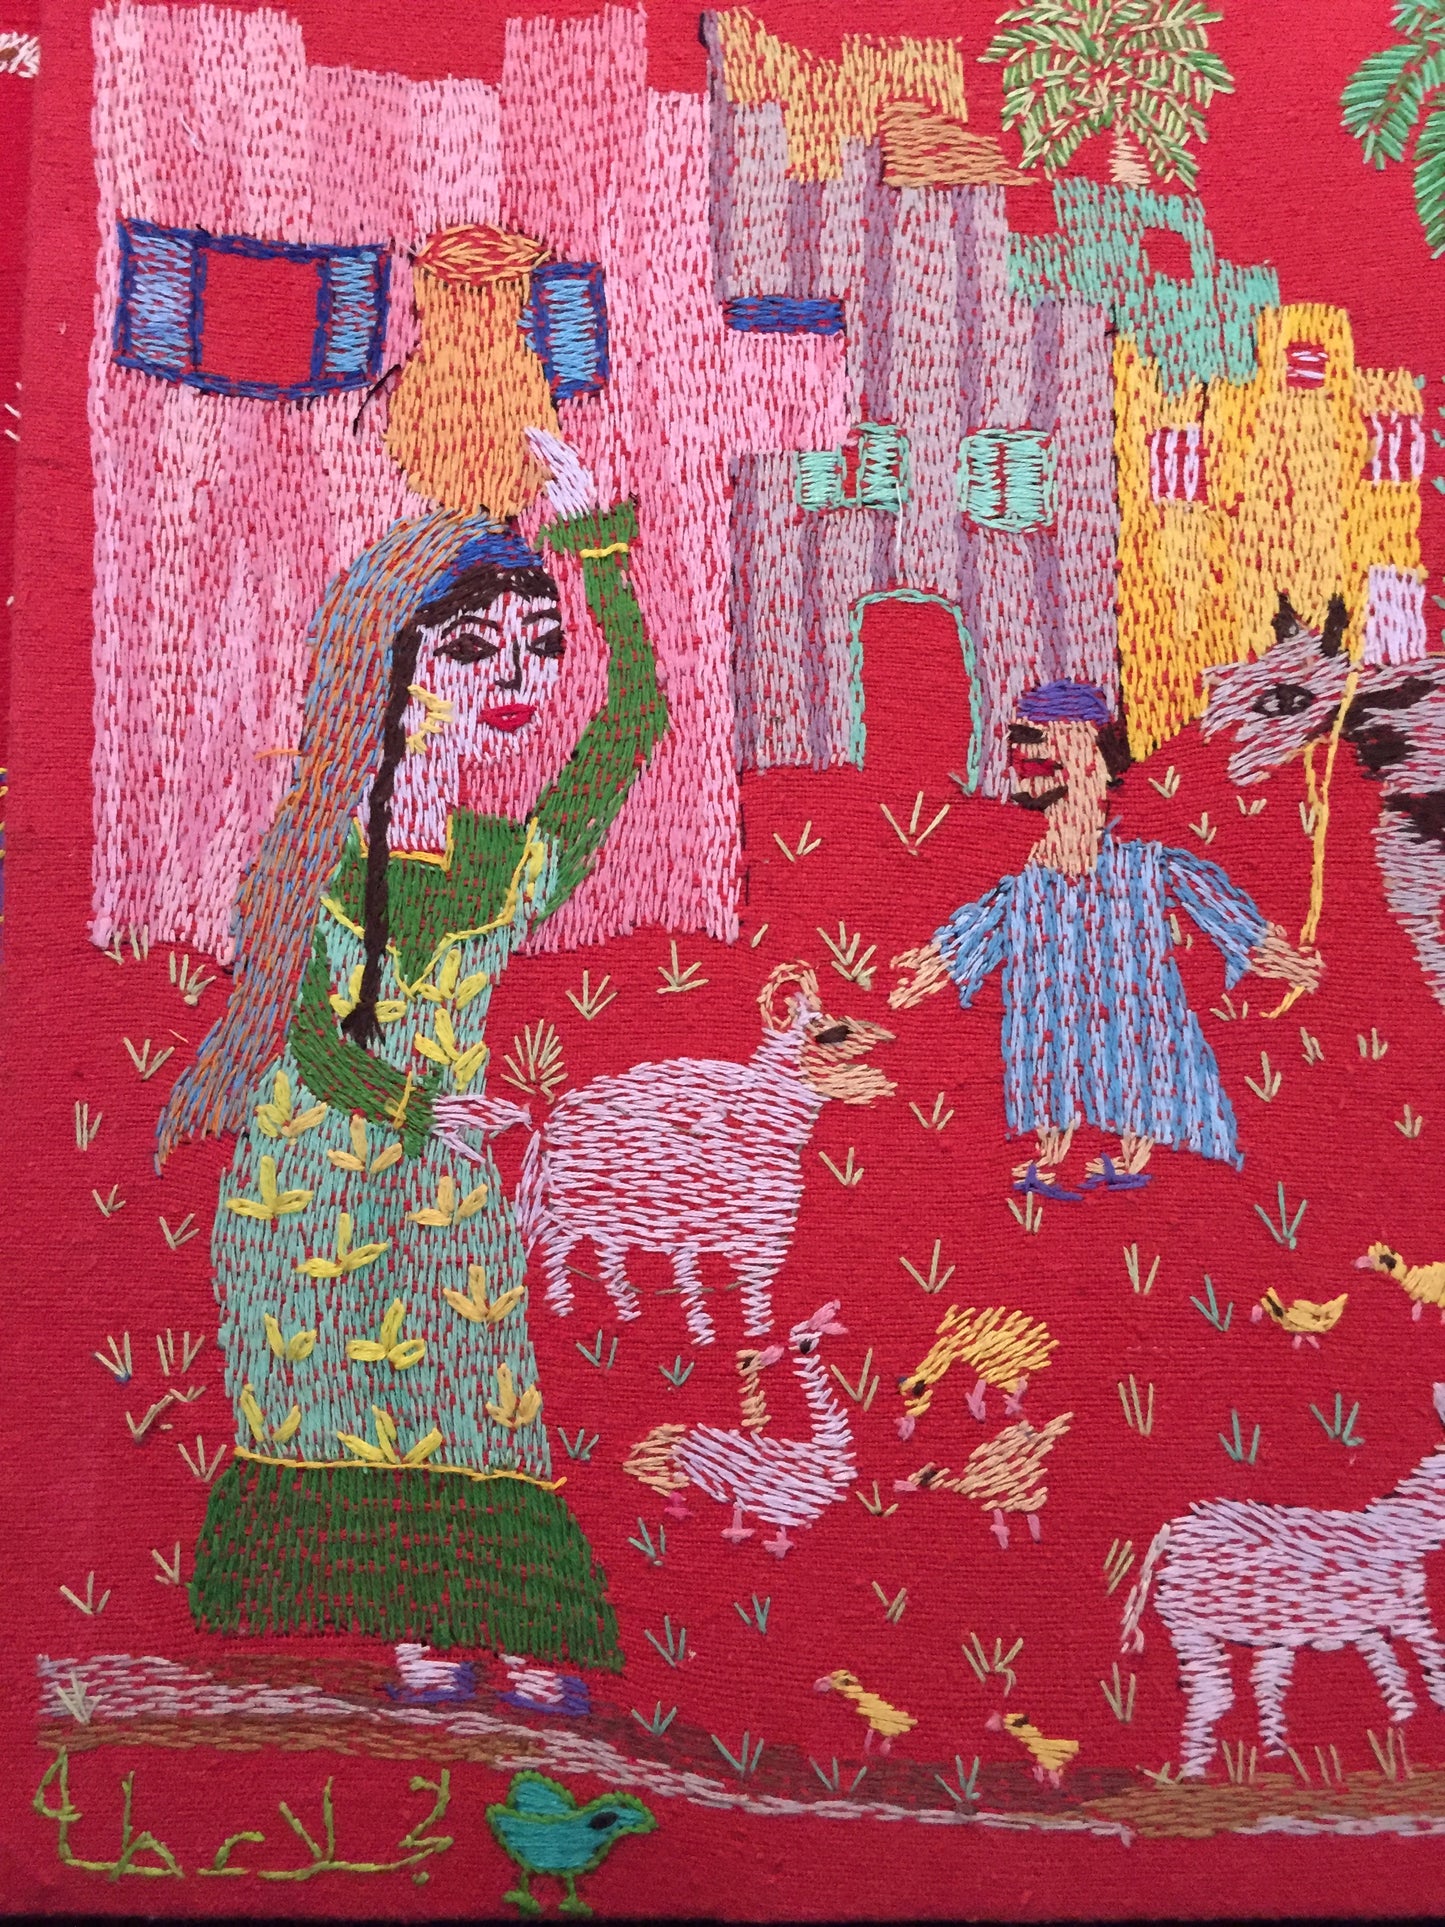 Hand Embroidered Tapestry - The Countryside by Naglaa Taha - Dandarah